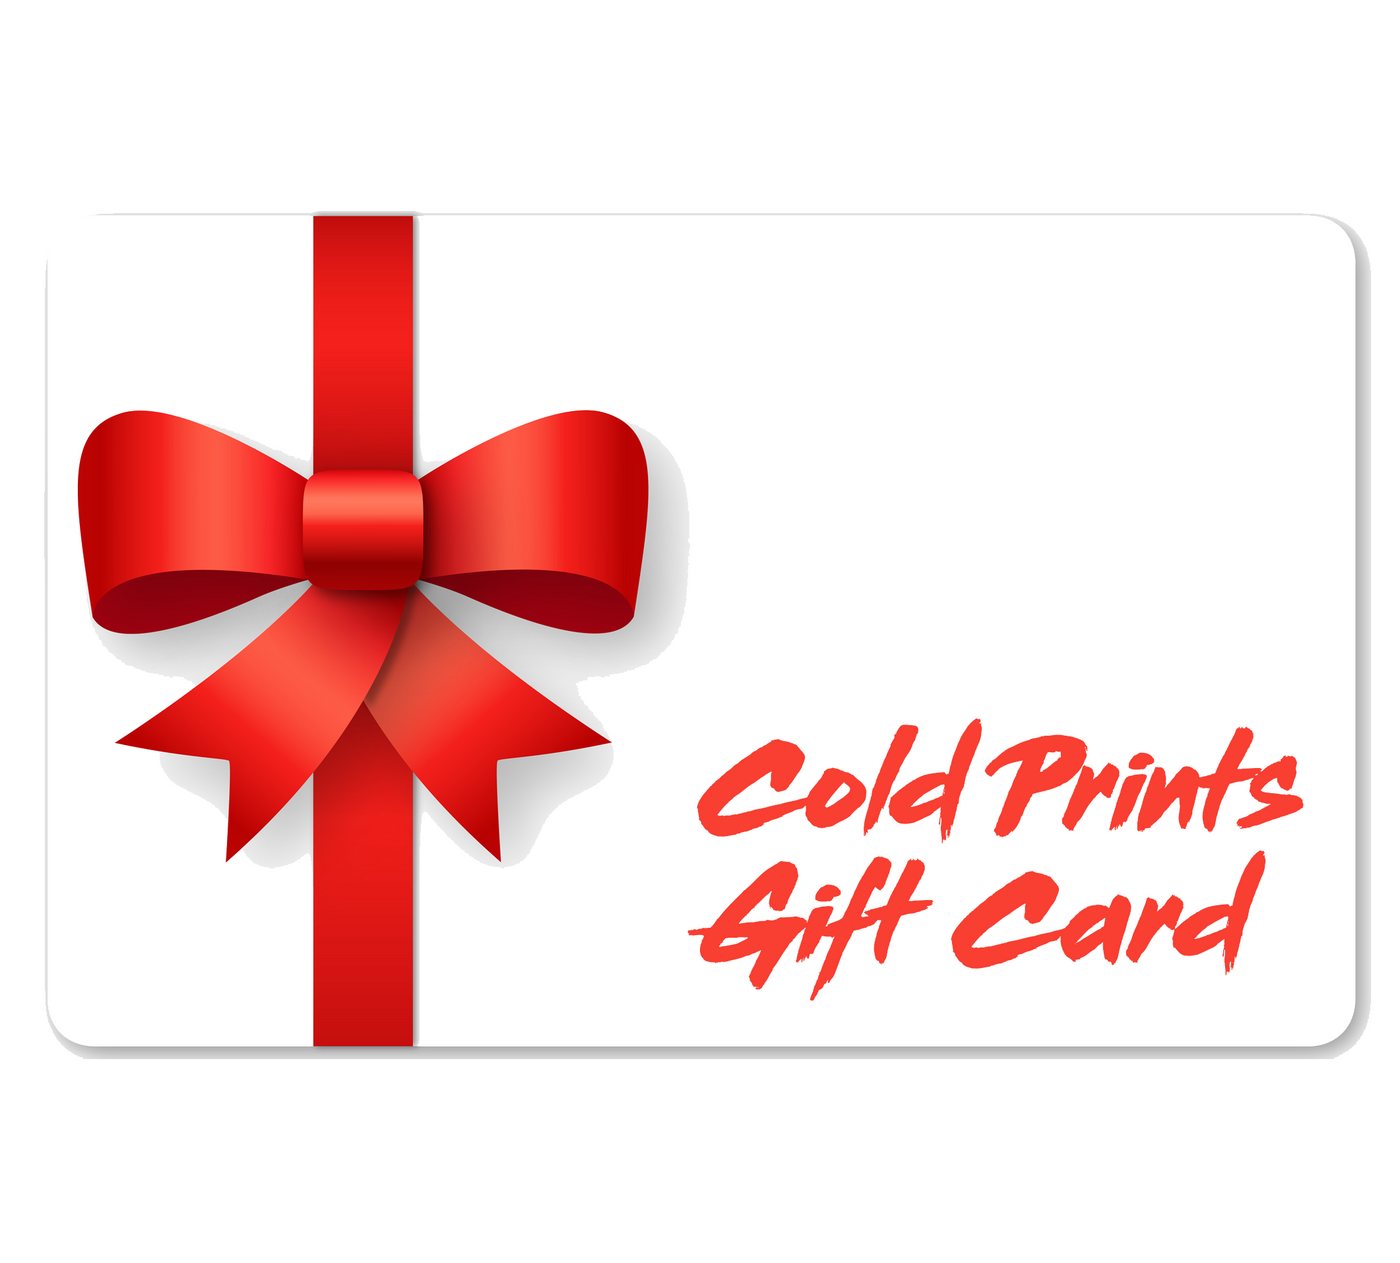 Cold Prints Gift Card